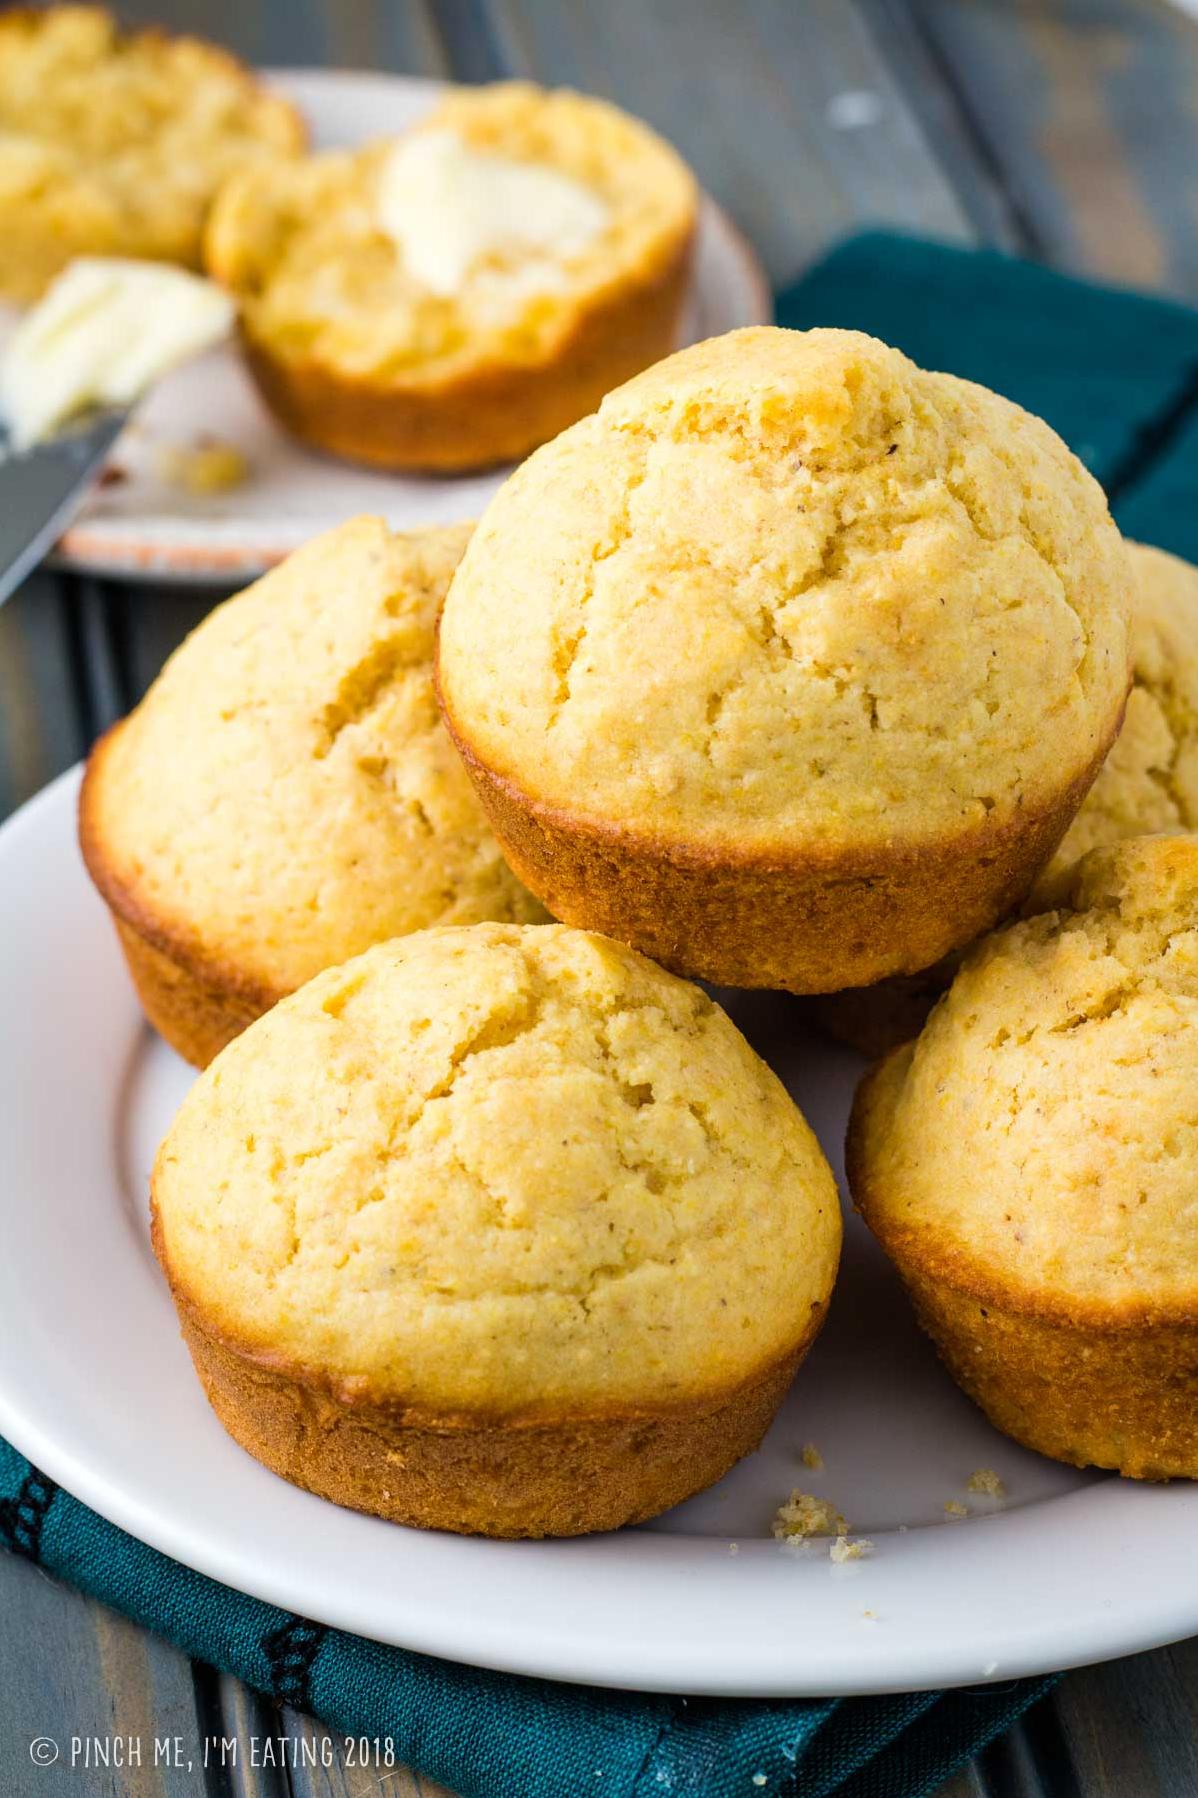  Warm cornbread muffins straight out of the oven are a match made in heaven with a hot cup of coffee.